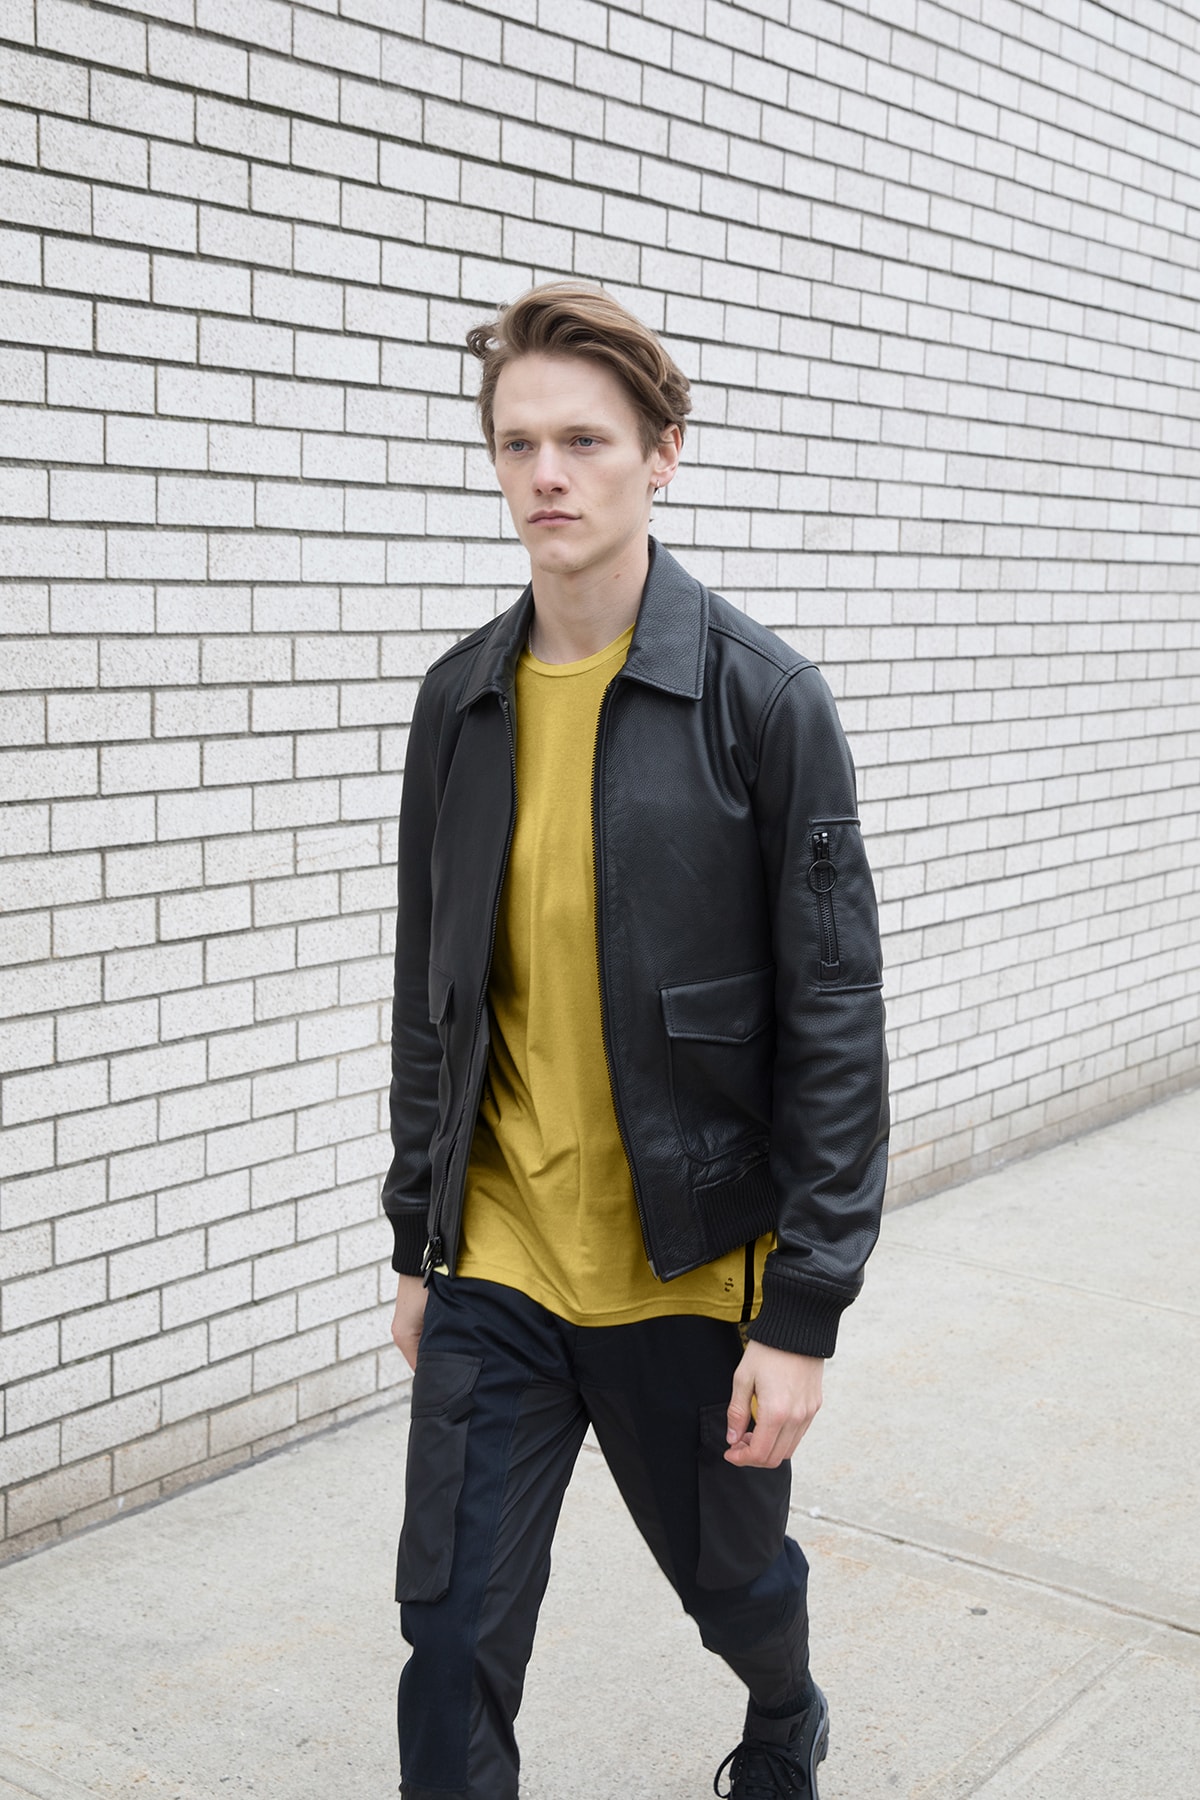 the arrivals mountain wear parkas bombers unisex tees leather jackets yellow shirt brick wall